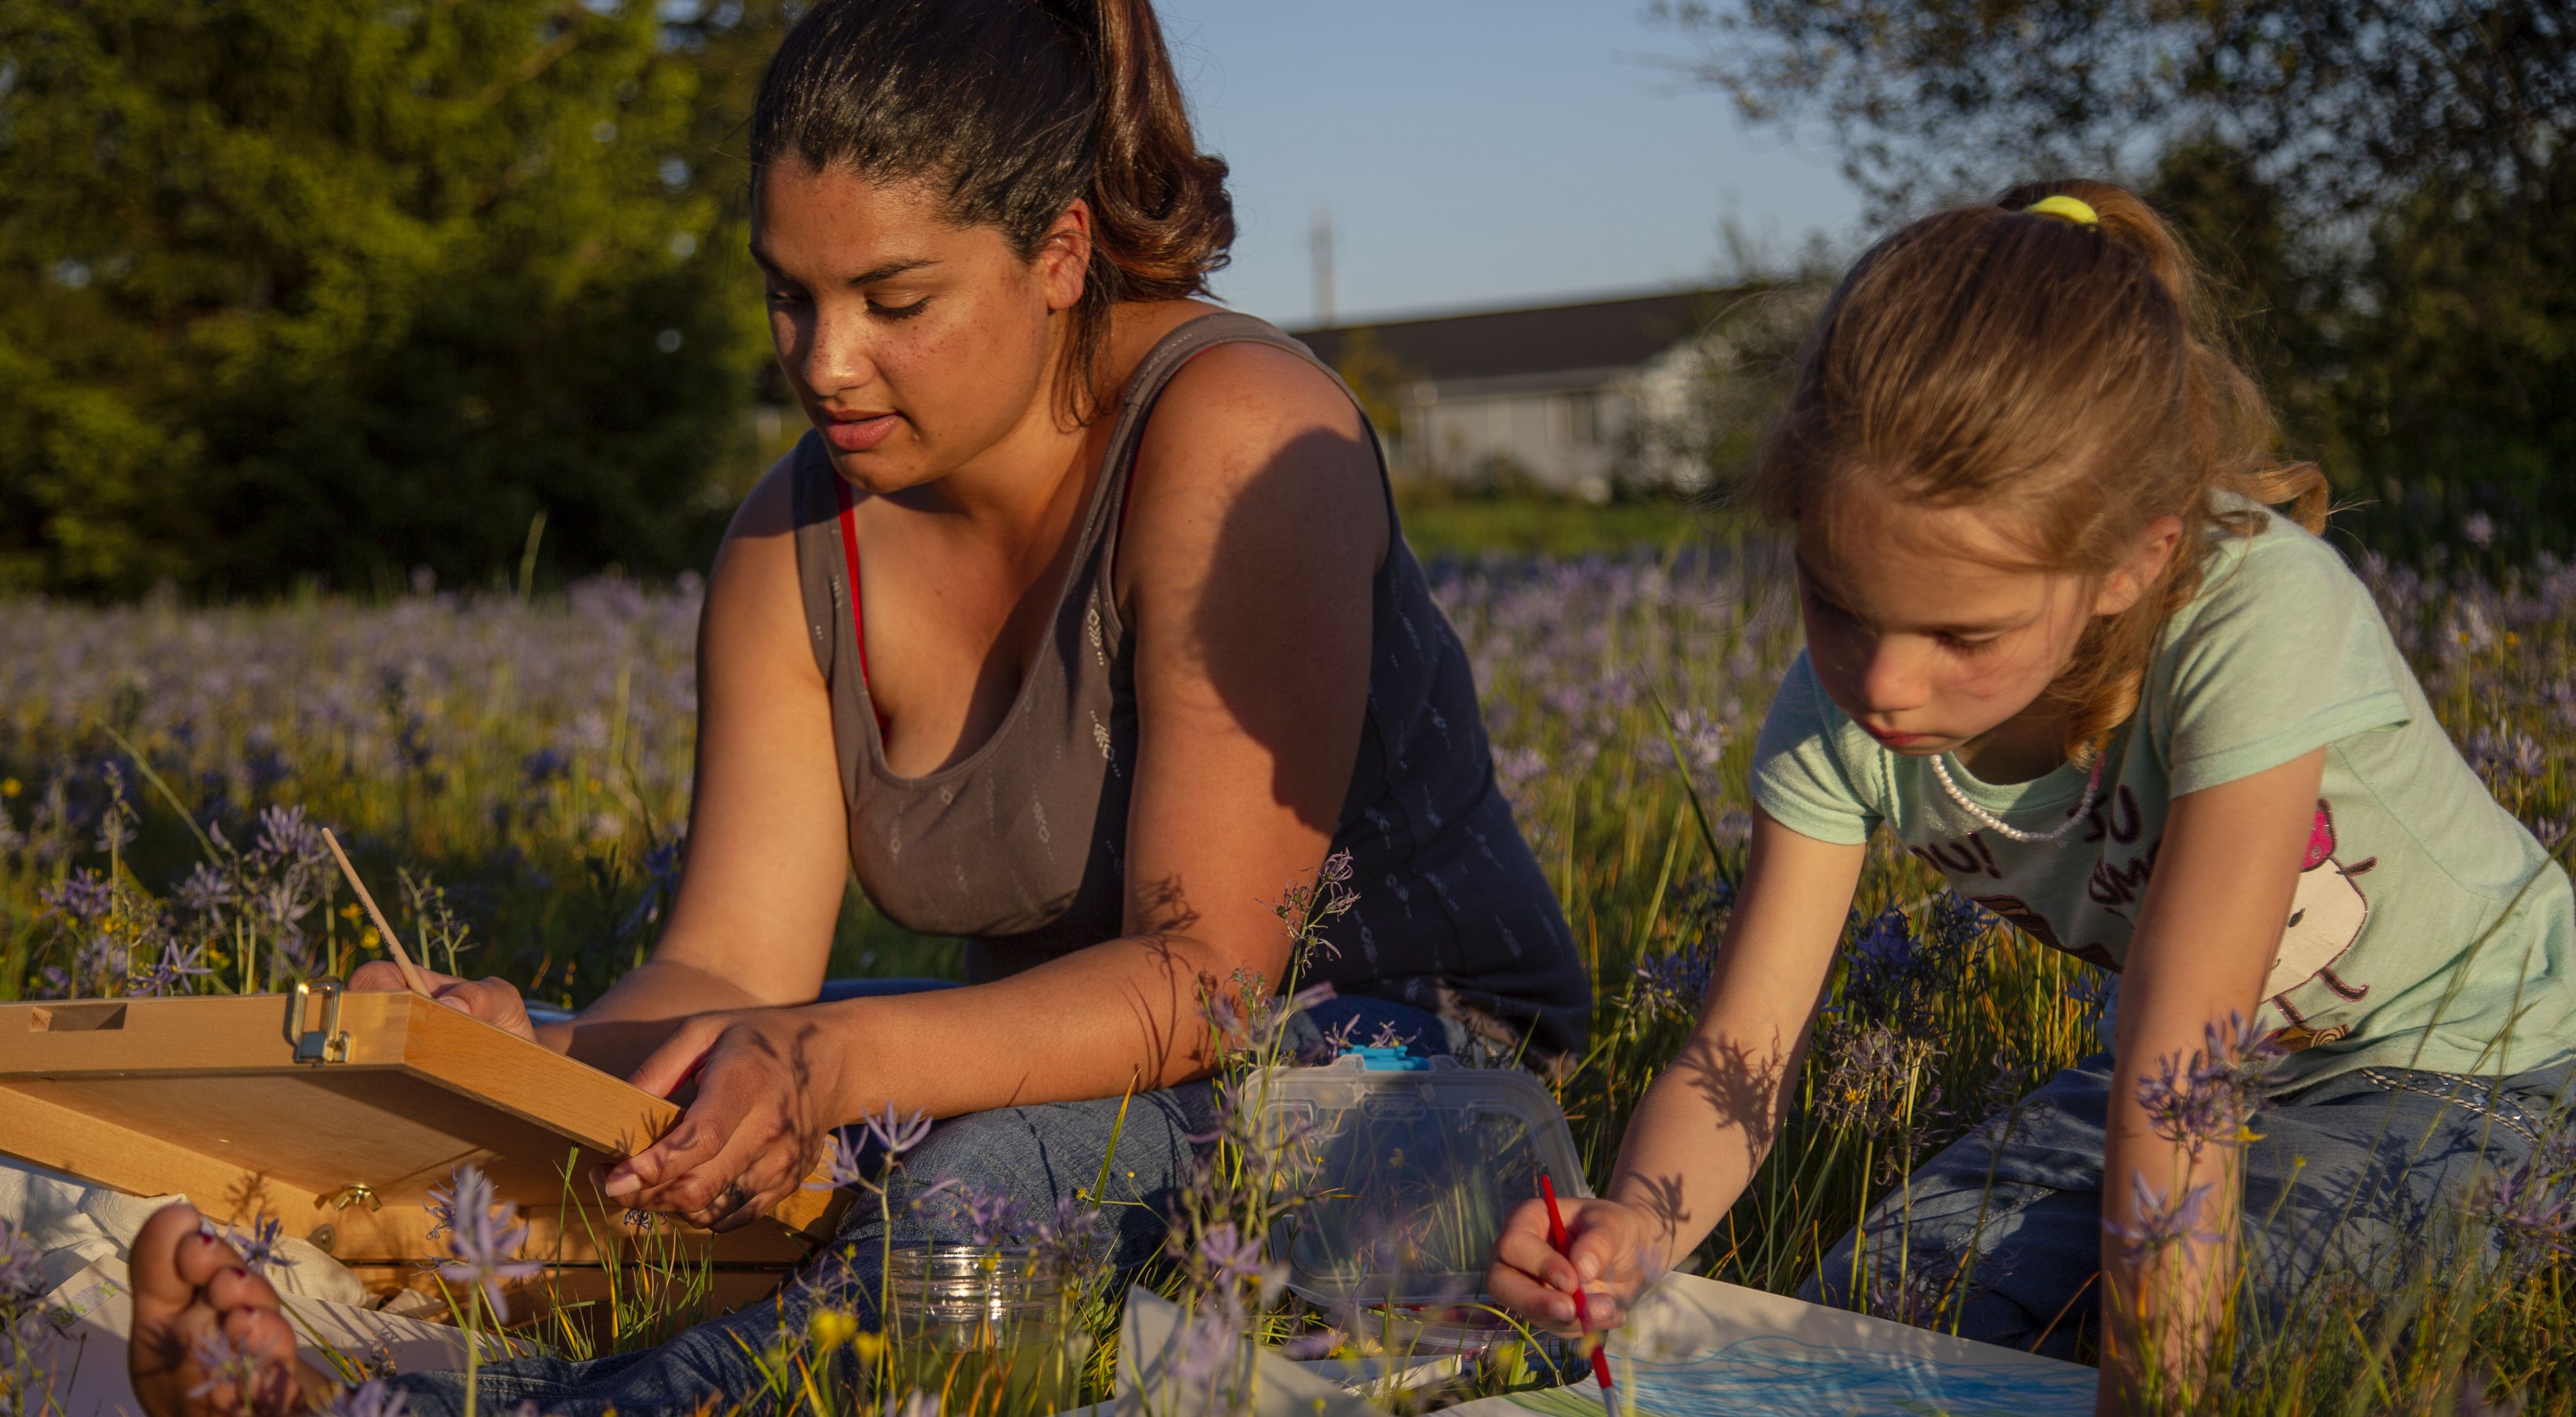 Kenison sits beside daughter-hair in ponytail-in a field of high purple meadow flowers, each with a canvas and paintbrush. Both focused on painting. House sits in distance.